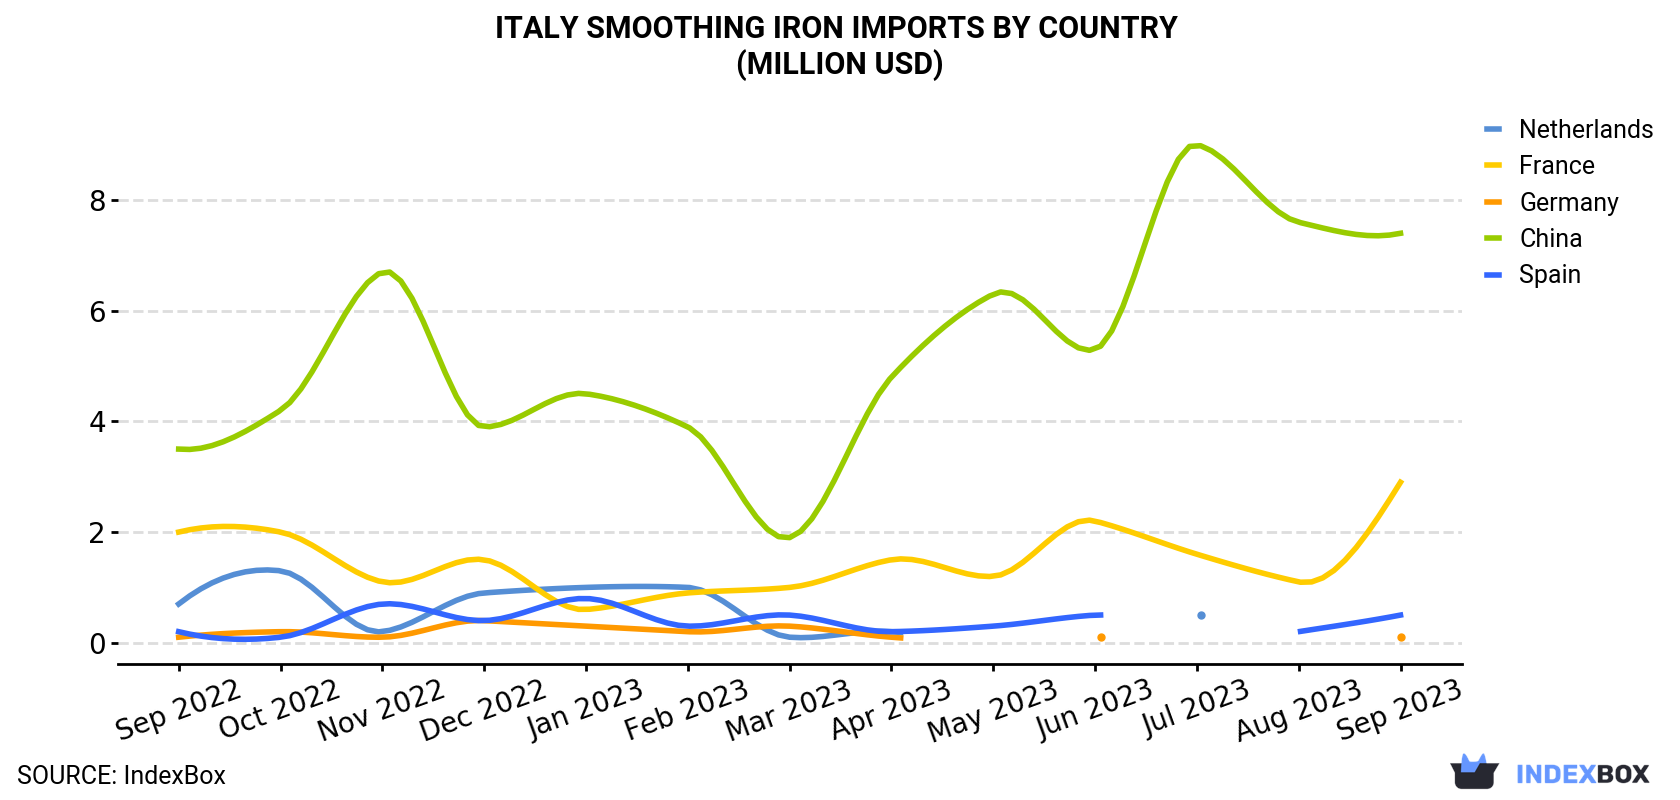 Italy Smoothing Iron Imports By Country (Million USD)